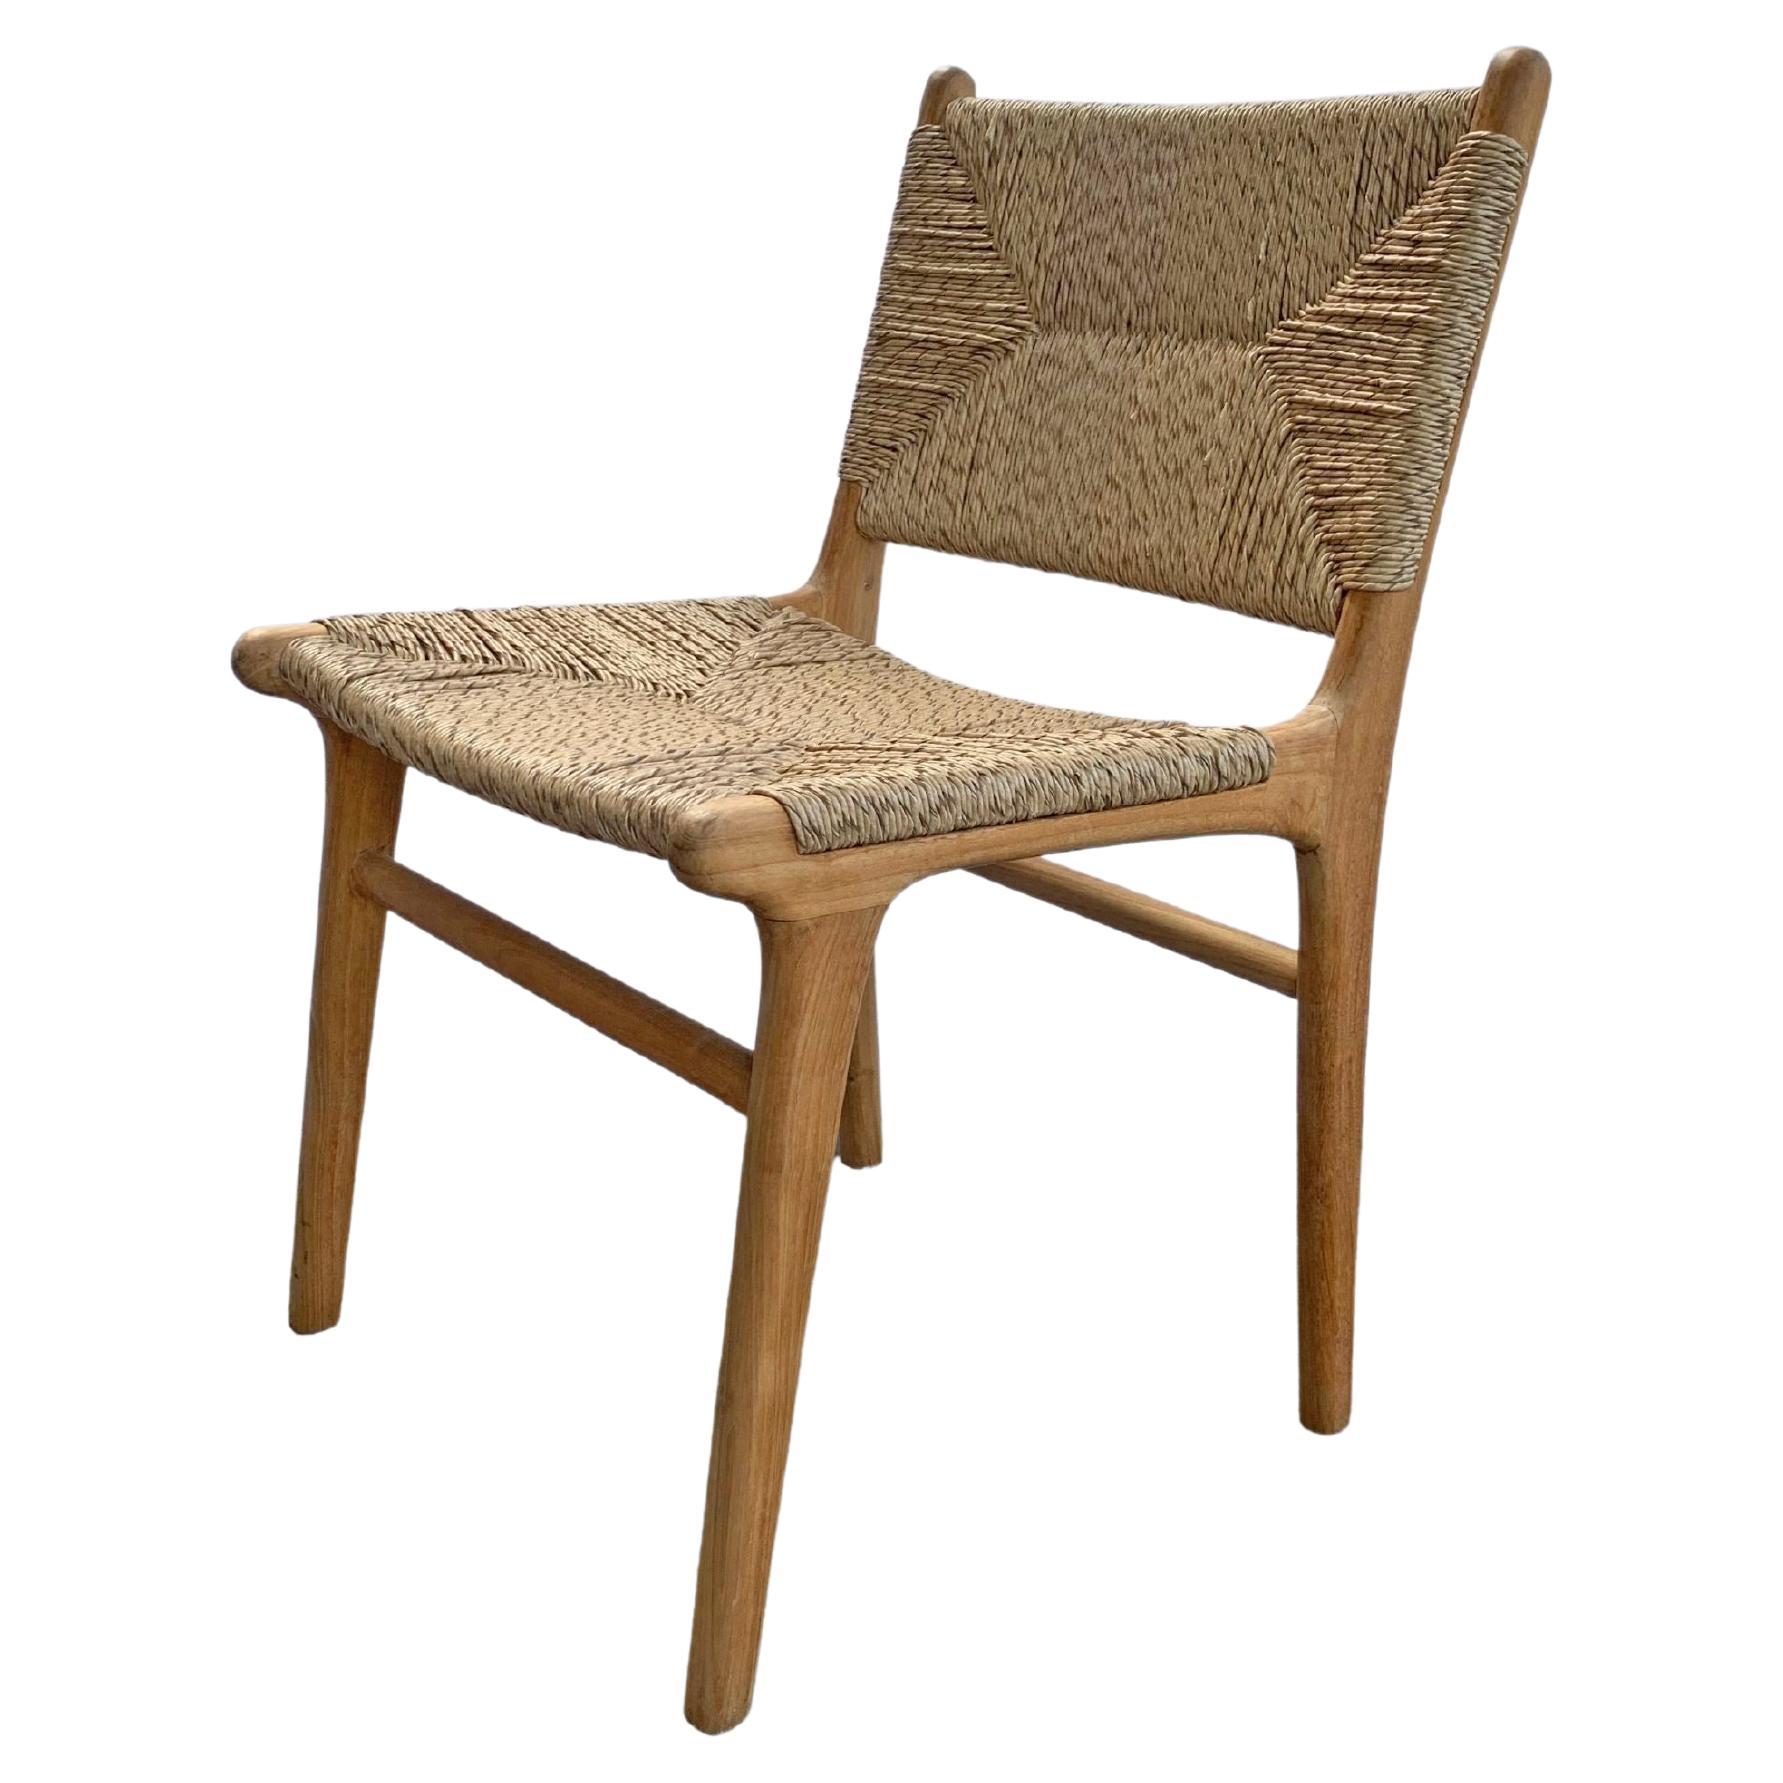 Teak Wood Framed Chair with Woven Synthetic Rattan Seat